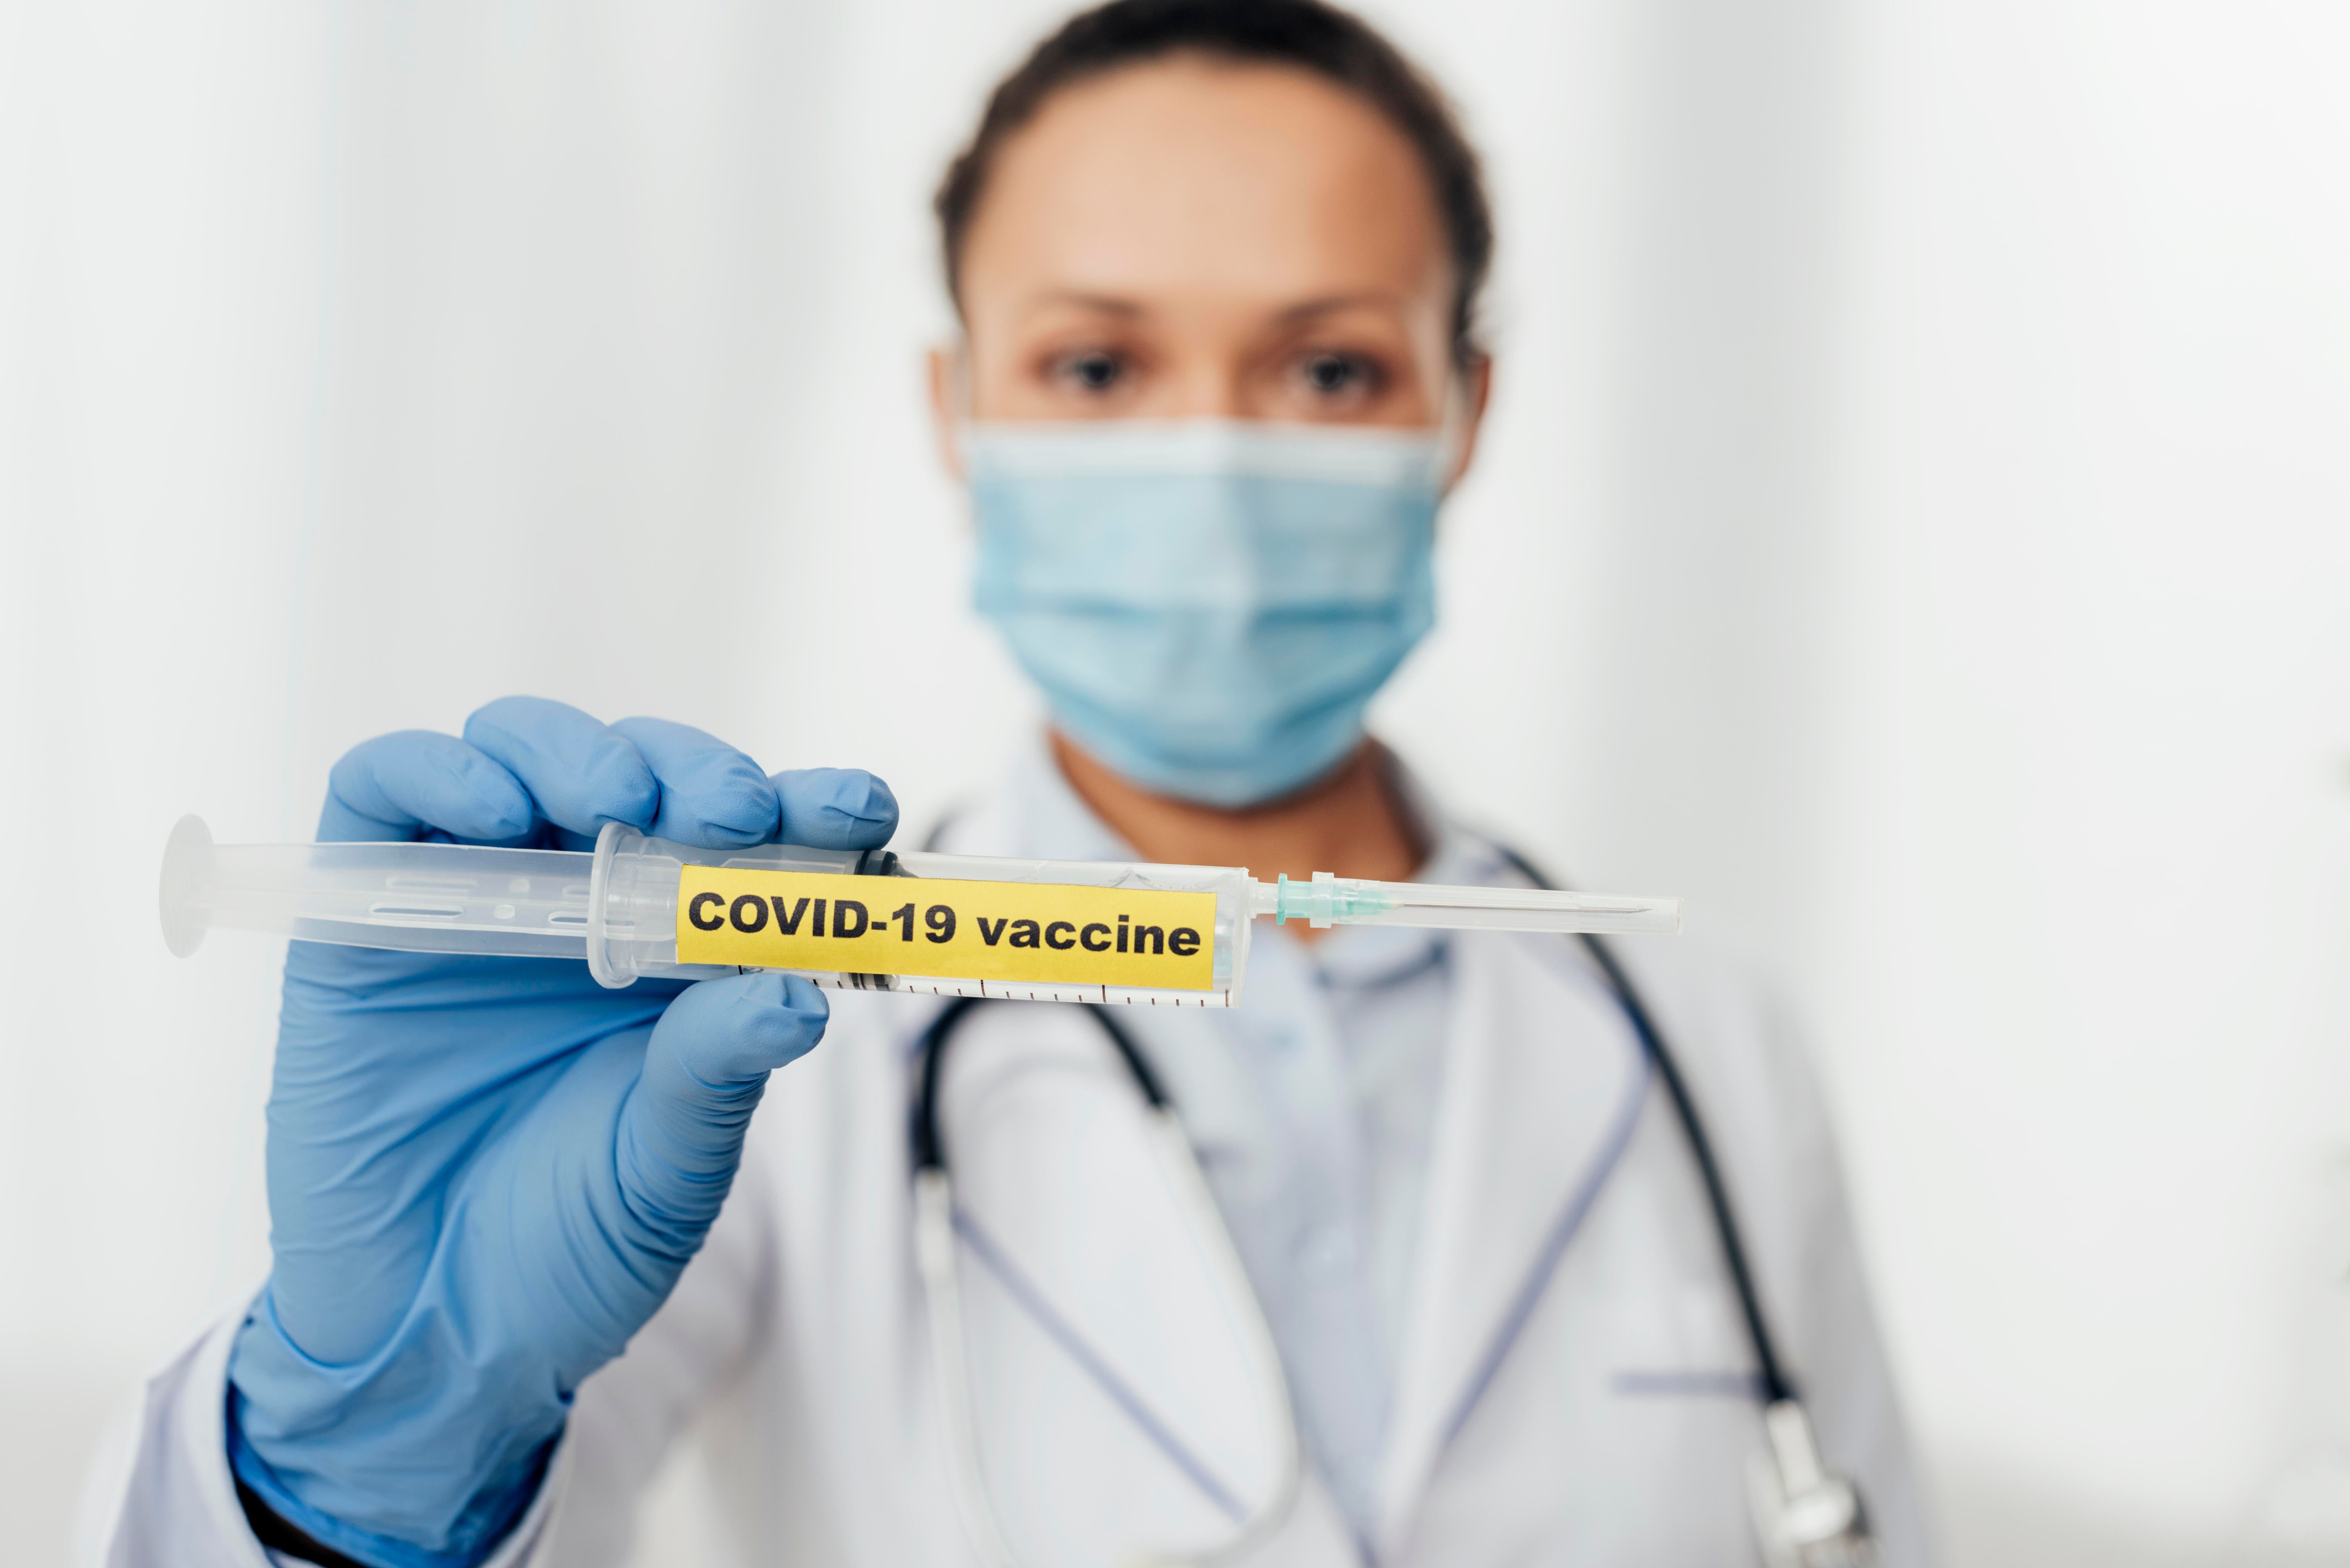 Rehearsal exposes gaps in COVID vaccine delivery